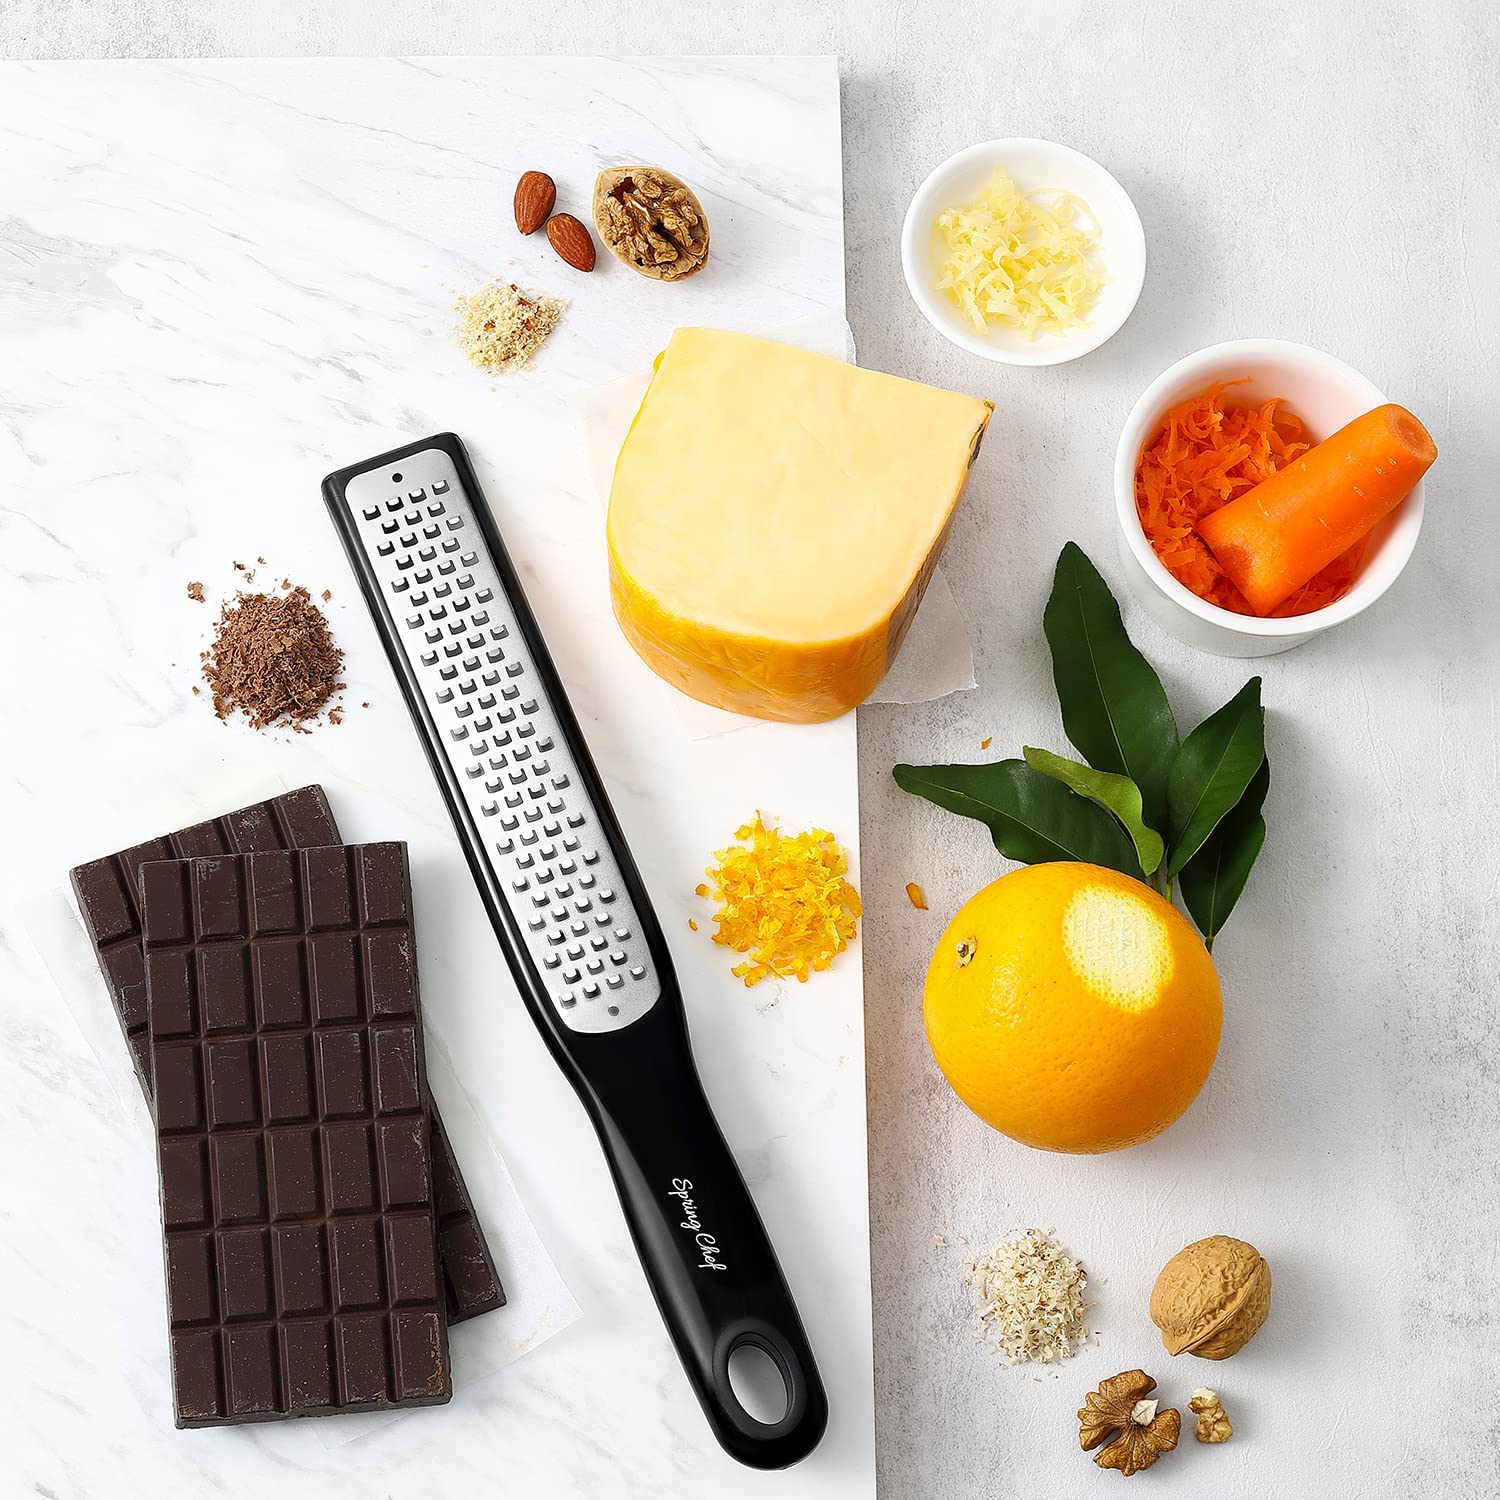 yq Handheld Cheese Grater Flat,Mini Stainless Steel Cheese Zester  Grater,Kitchen Tools for Cheese, Chocolate, Spices, Ginger, Citrus Lemon  Zester